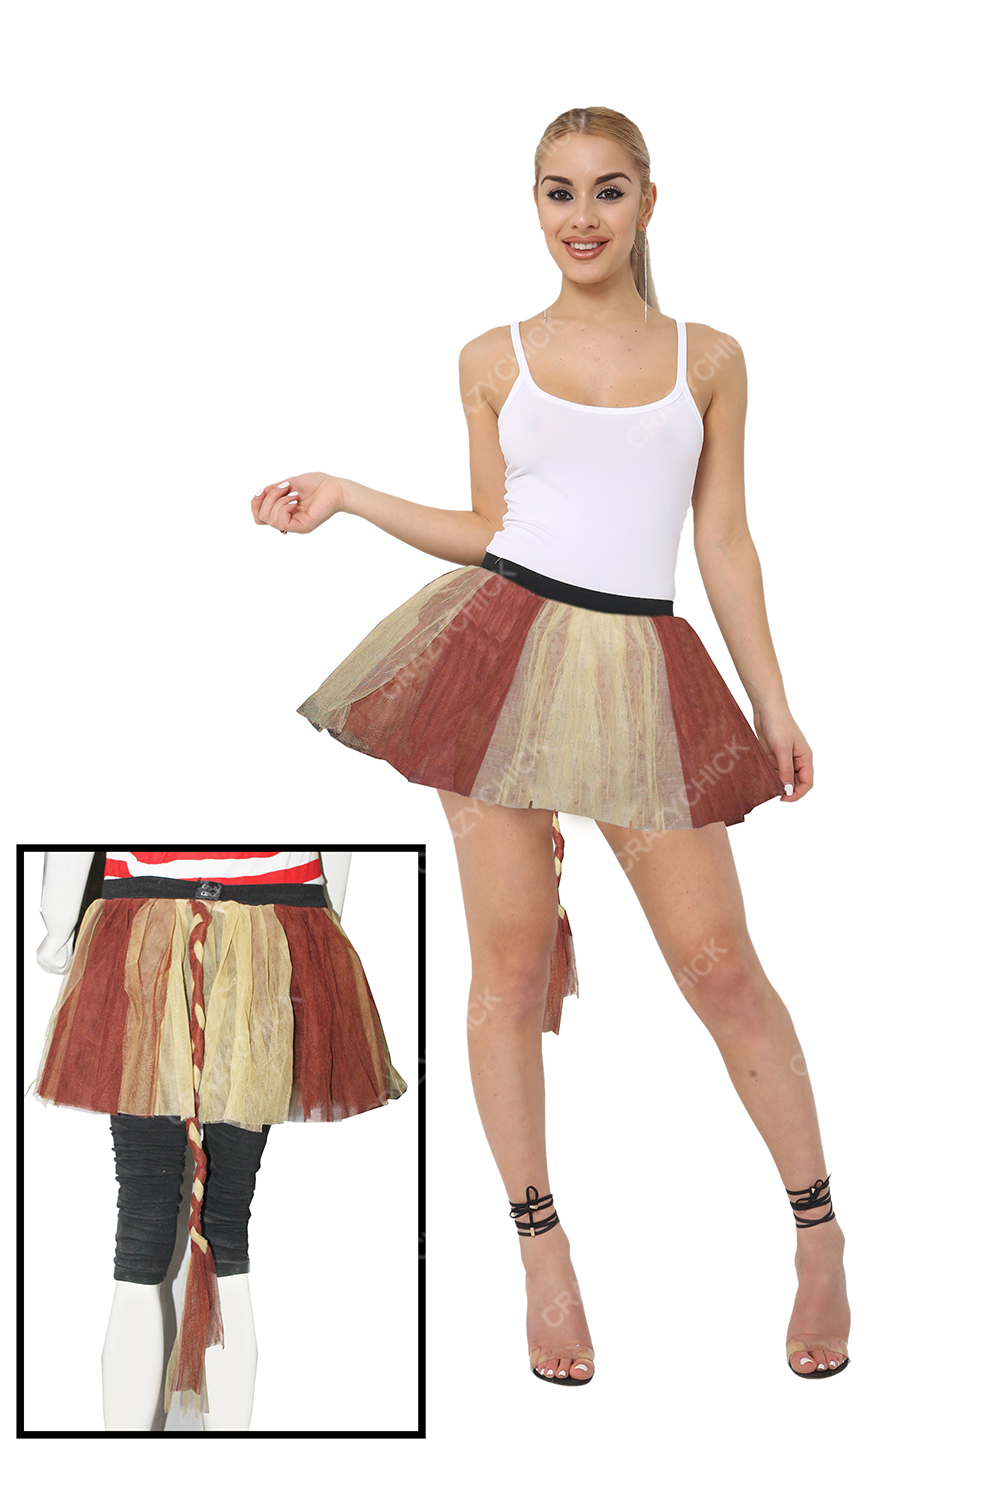 Crazy Chick Girls 3 Layers Plain Golden Brown Tutu Skirt With Tail